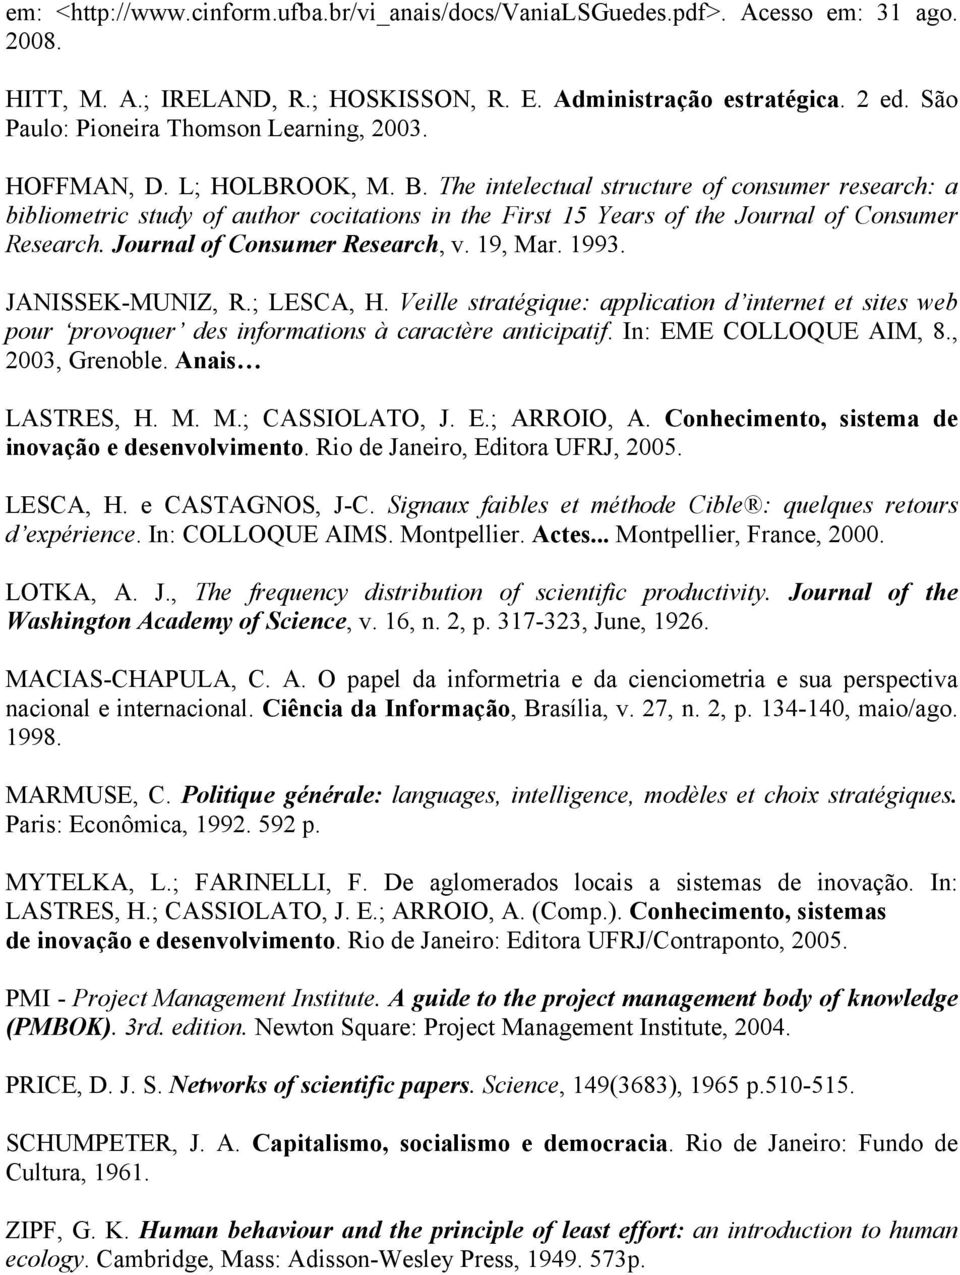 The intelectual structure of consumer research: a bibliometric study of author cocitations in the First 15 Years of the Journal of Consumer Research. Journal of Consumer Research, v. 19, Mar. 1993.